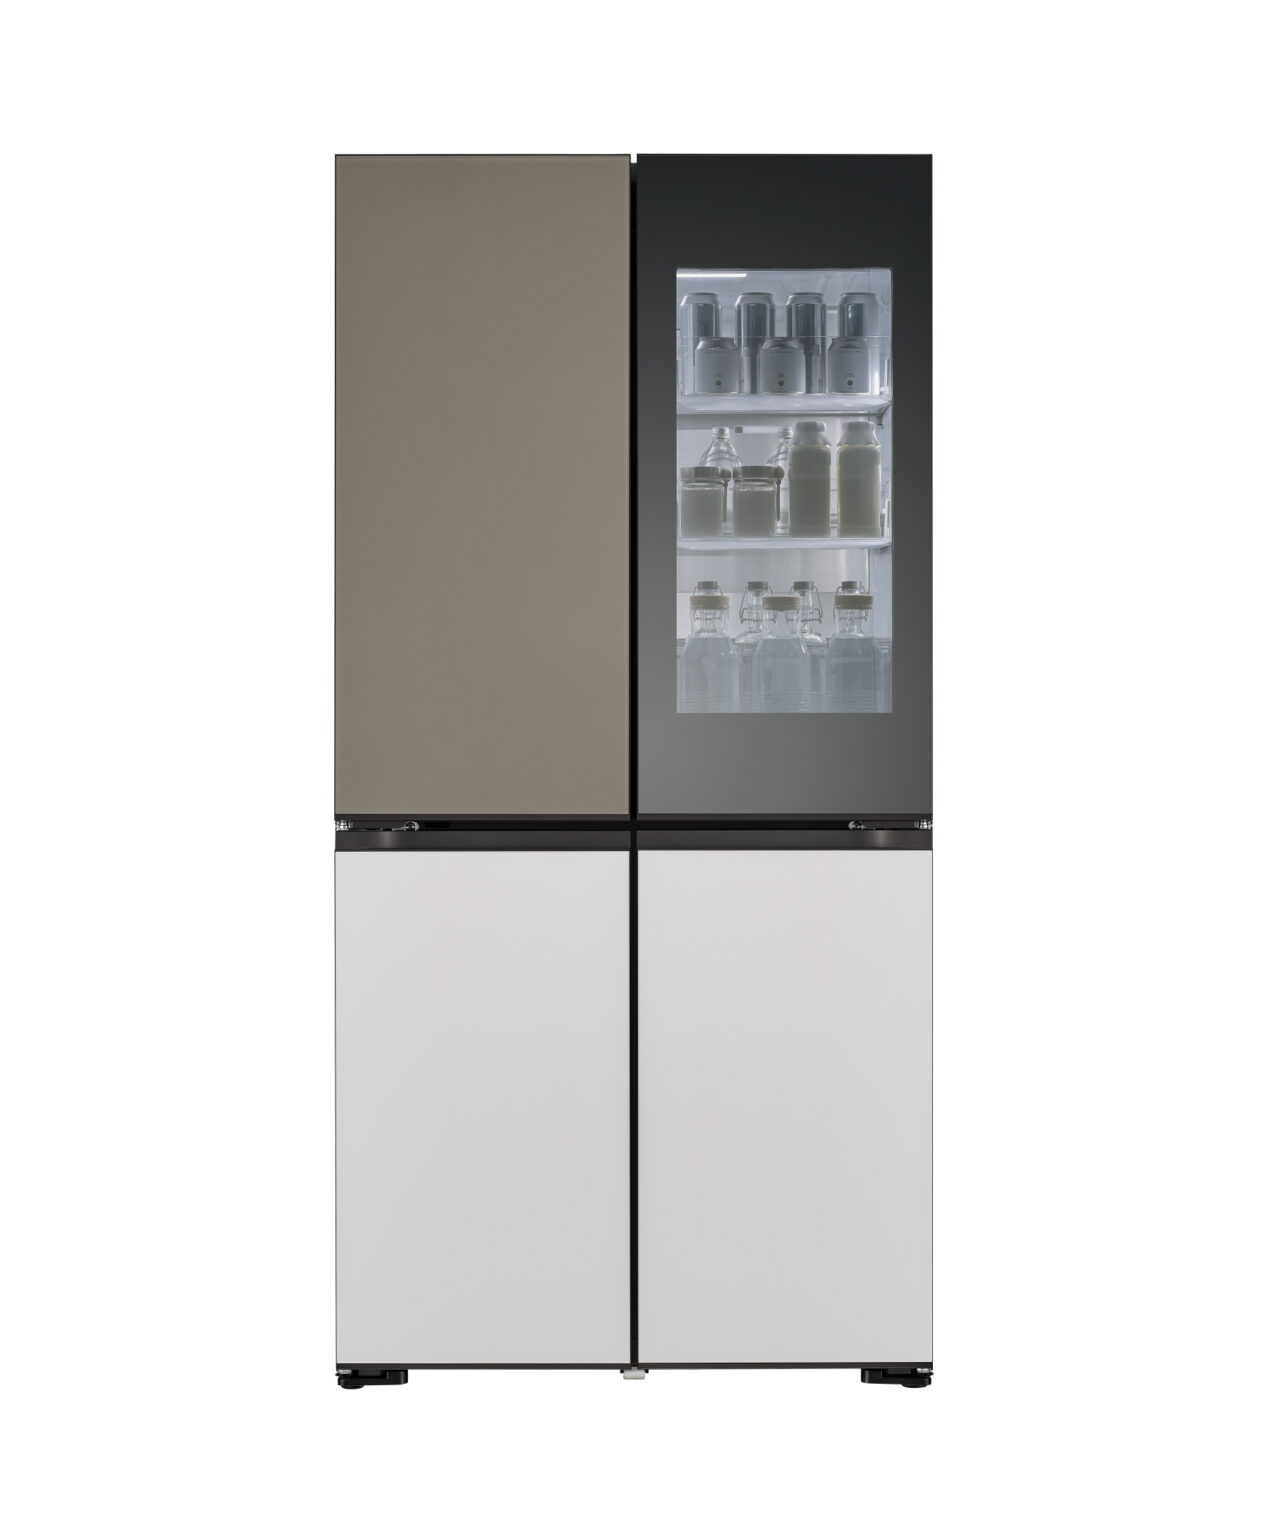 MoodUP™ Refrigerator Product Mood Off Lux Grey Lux White 02 1267x1536 